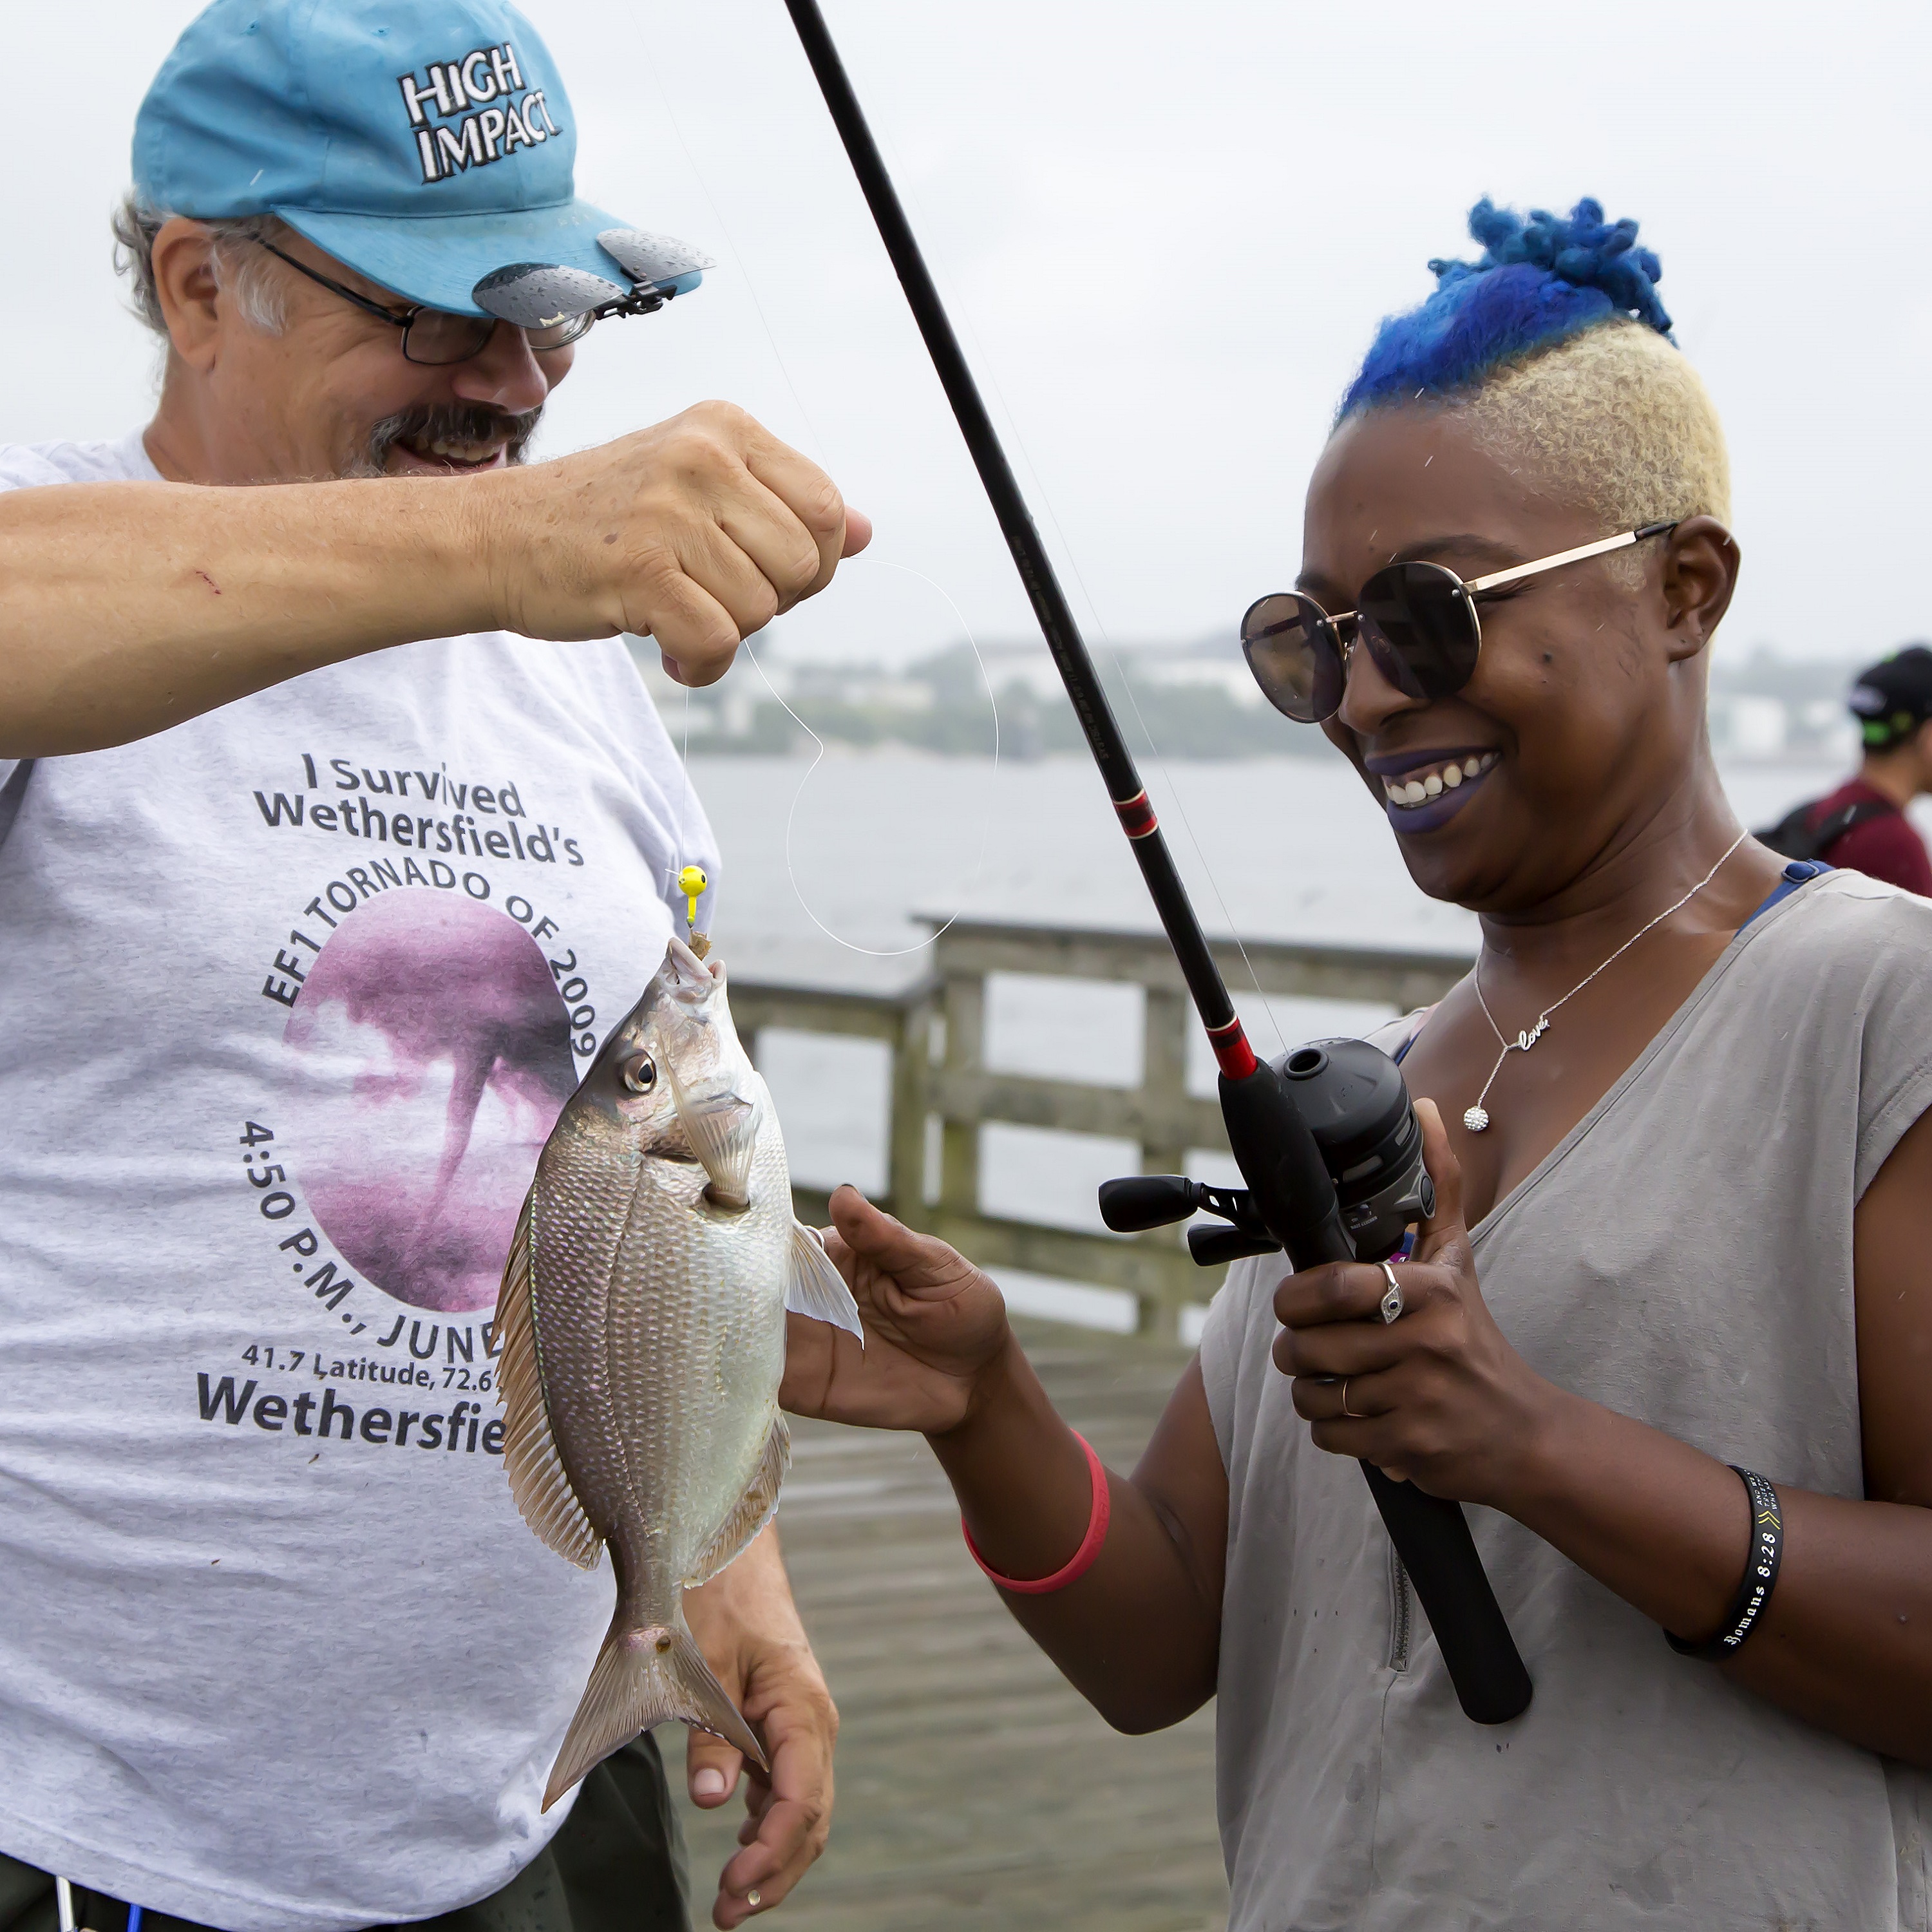 New angler catching a scup with a CARE fishing instructor on saltwater fishing day.